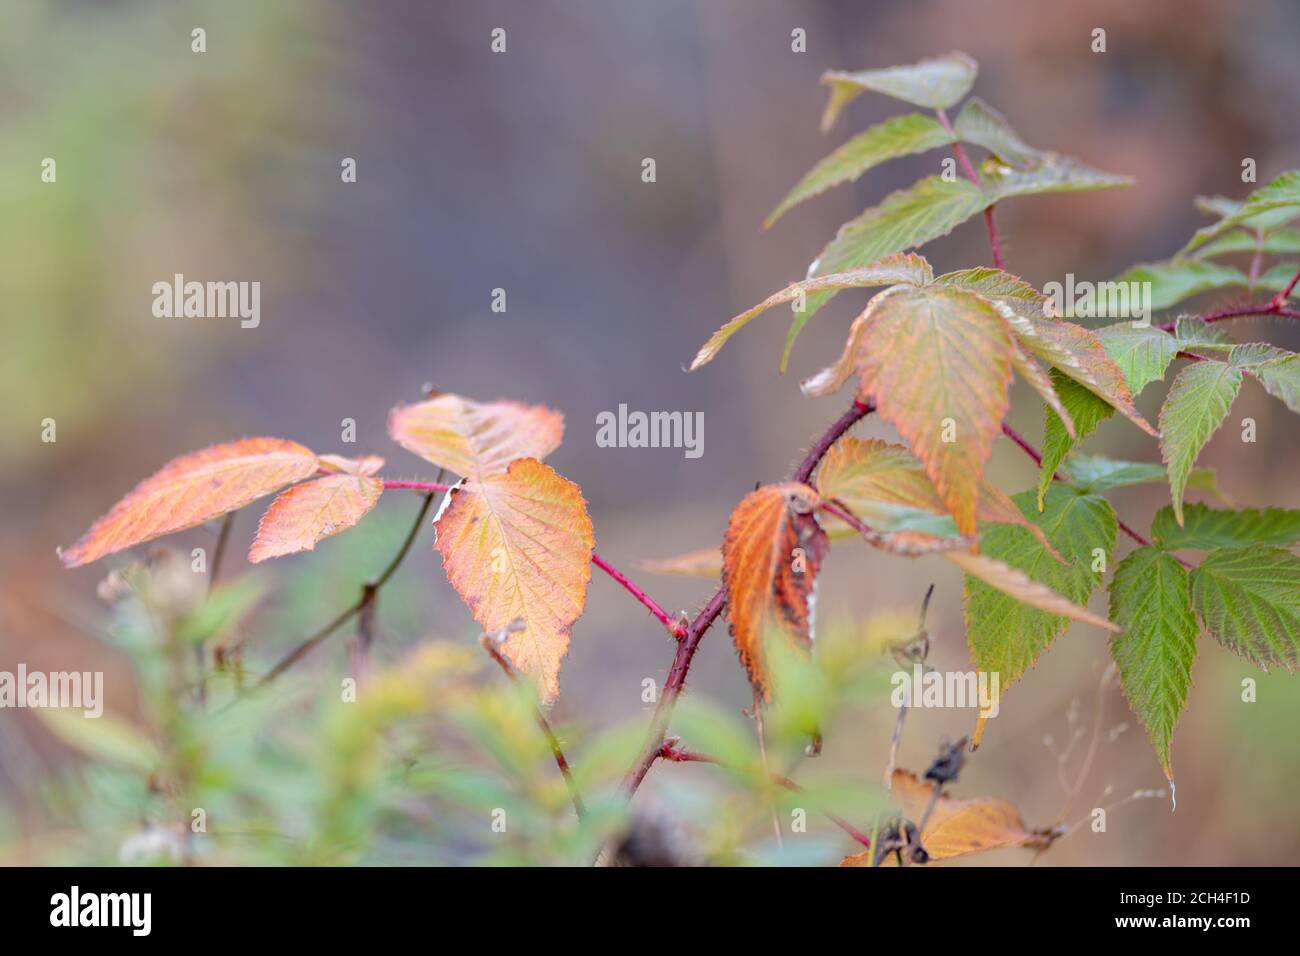 A close up of a cluster of green leaves and other autumn leaves changing colour to different shades of orange. The alder shrub has a very thin stalk. Stock Photo